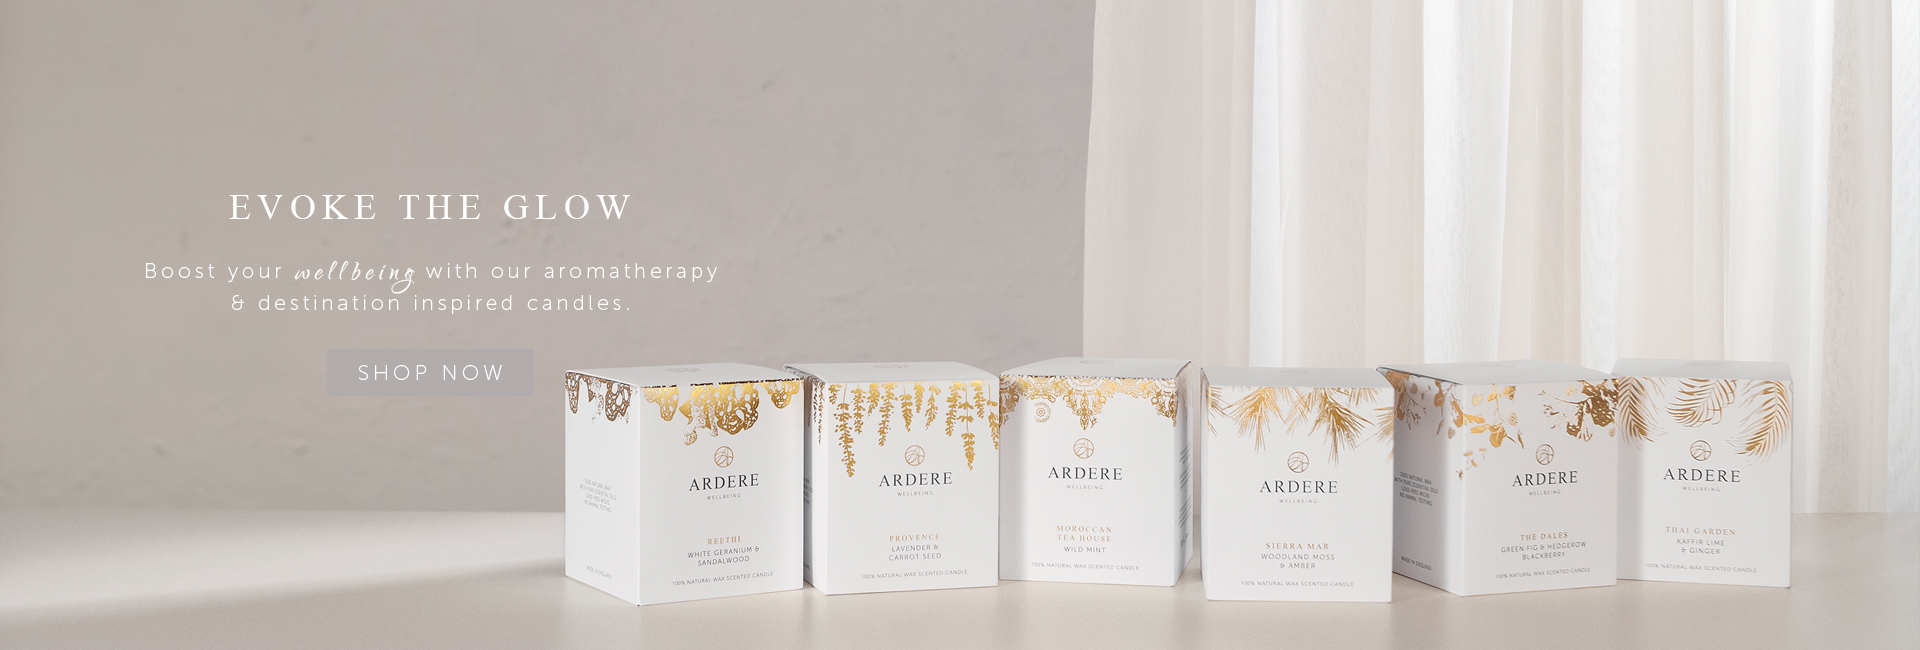 ARDERE CANDLE BOXES